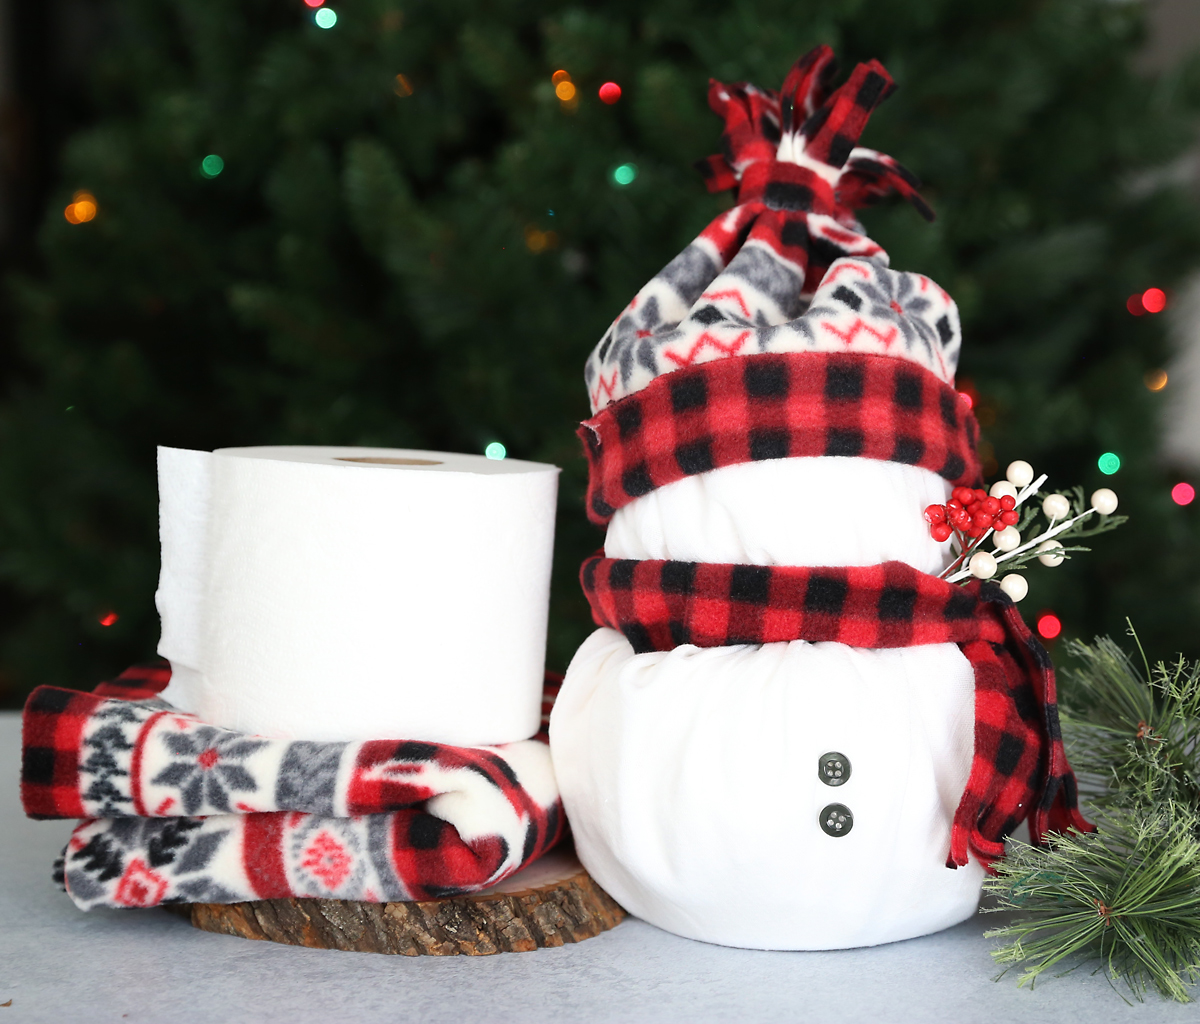 These adorable snowmen are made from rolls of toilet paper! Cute, easy Christmas craft.